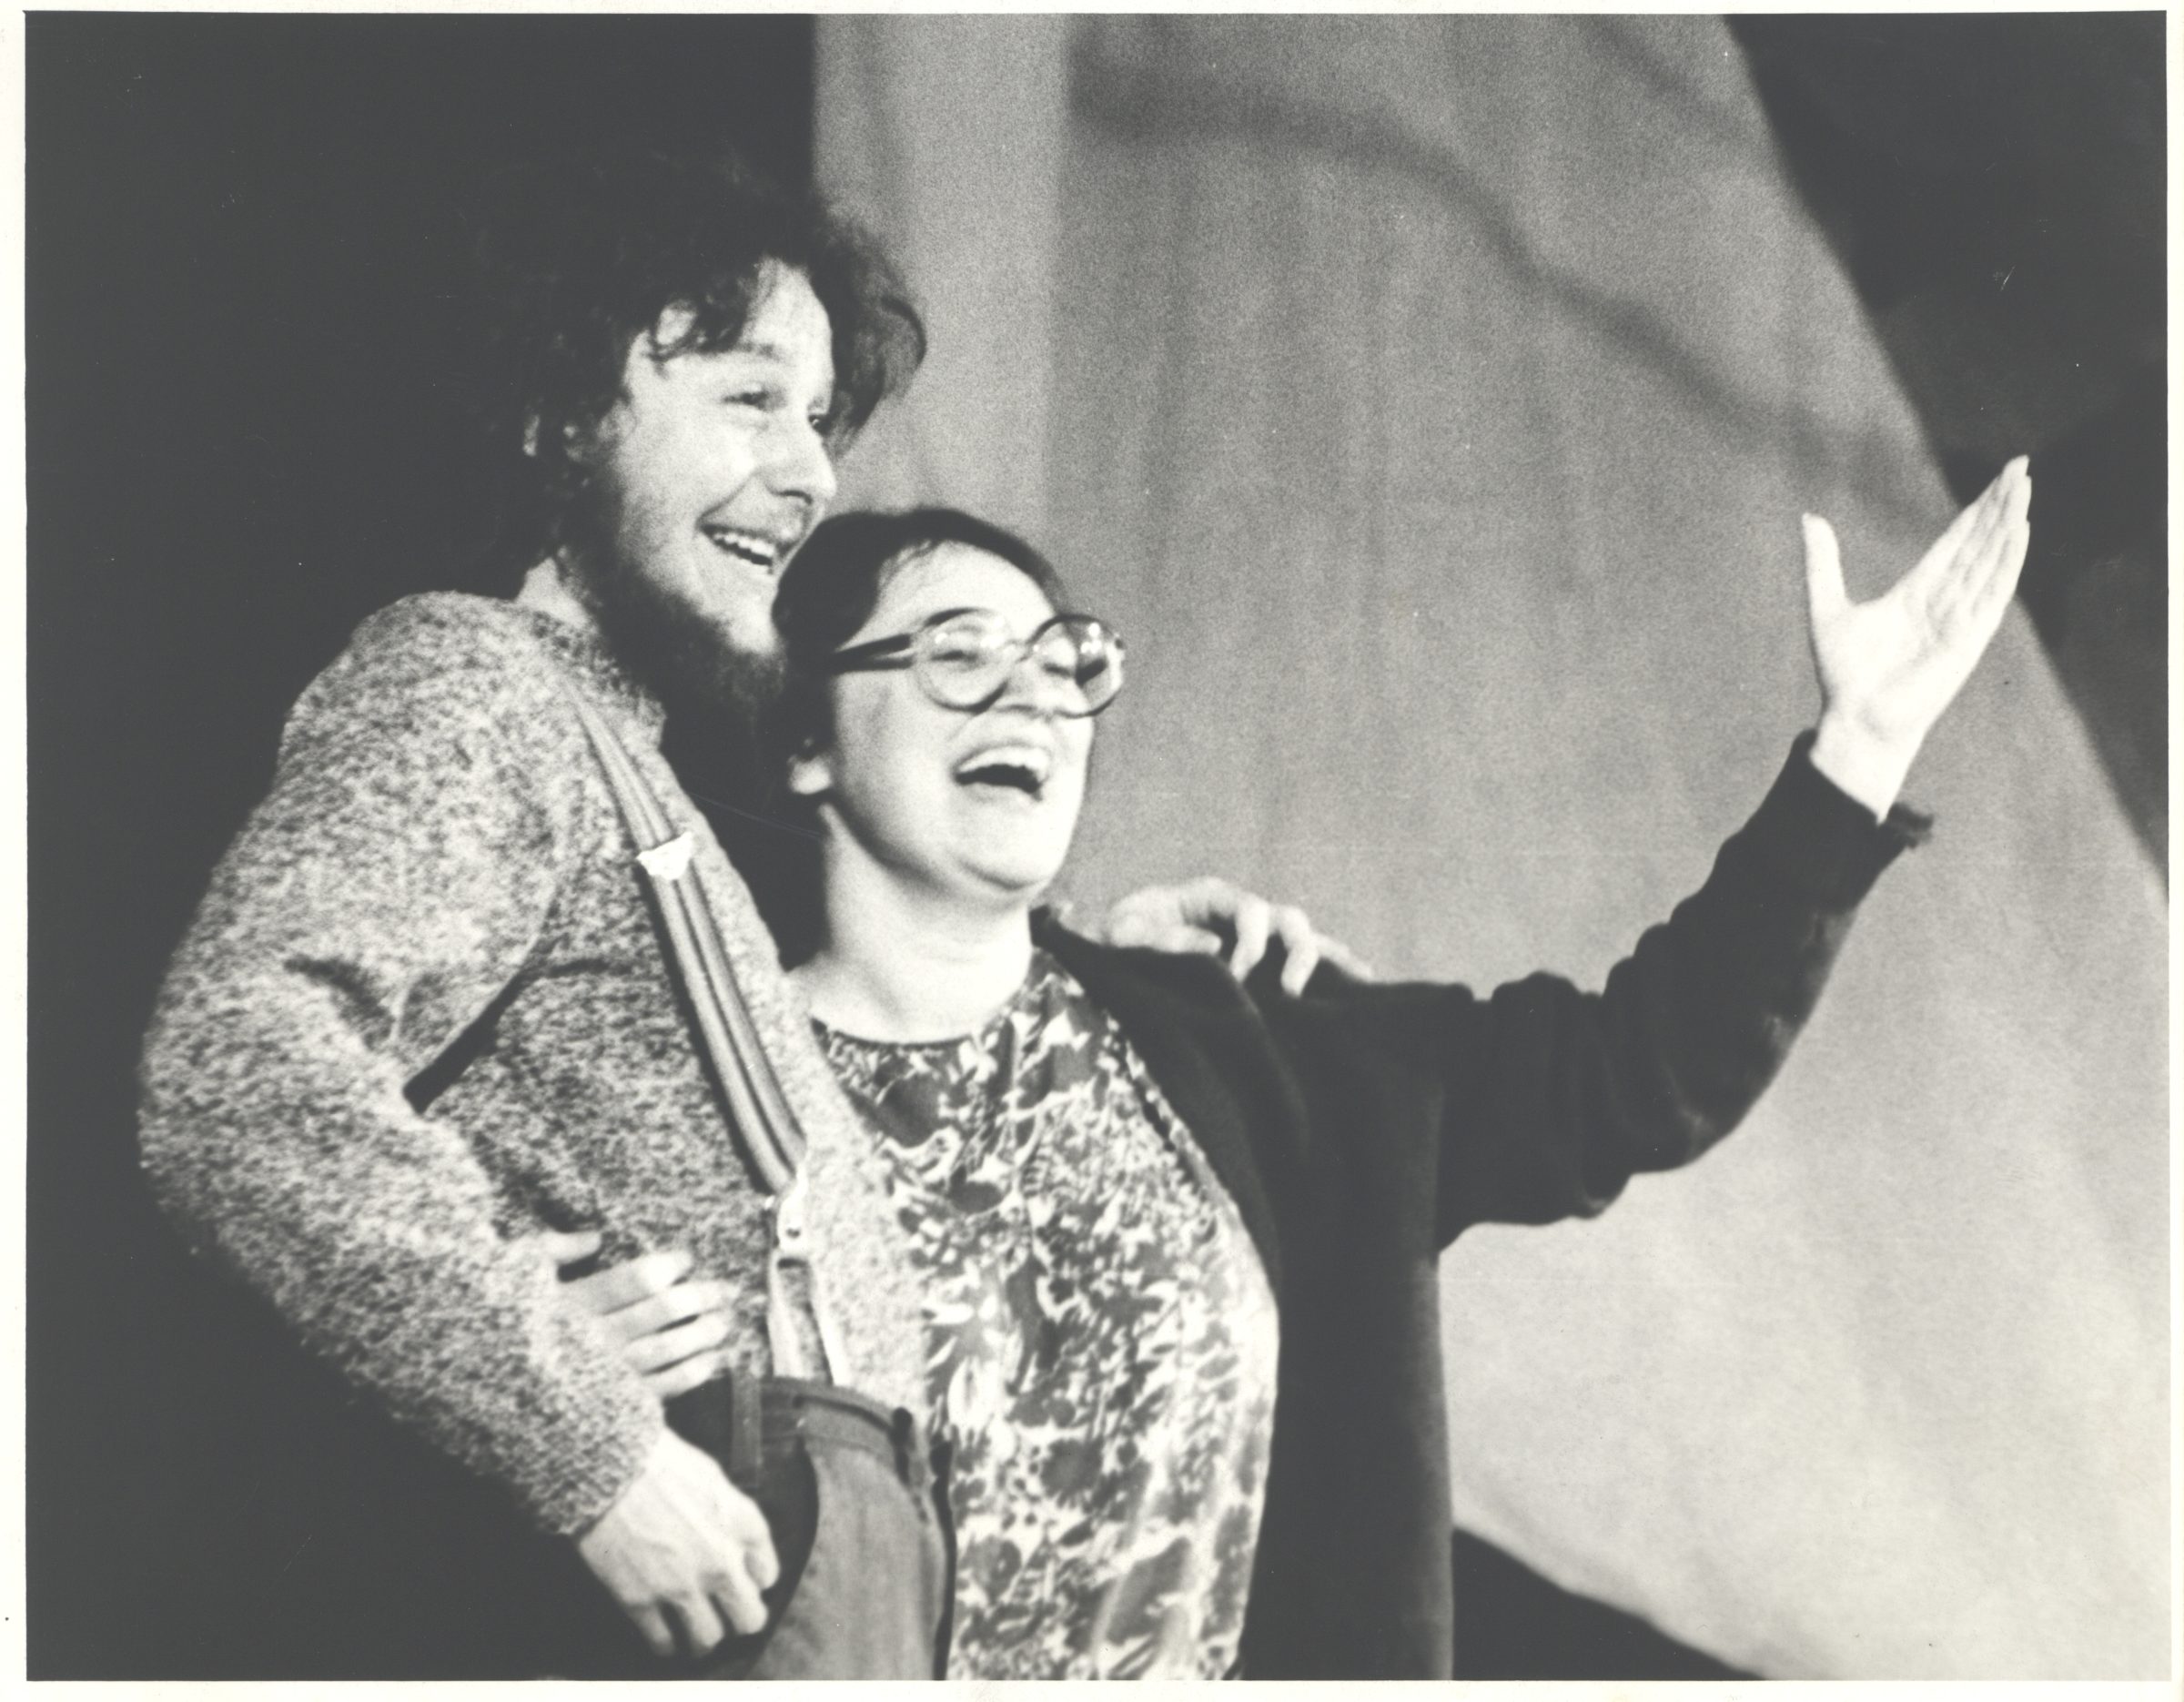 A black and white photo of two people holding each other side by side. They are both smiling and one is gesturing to the audience with their arm up.